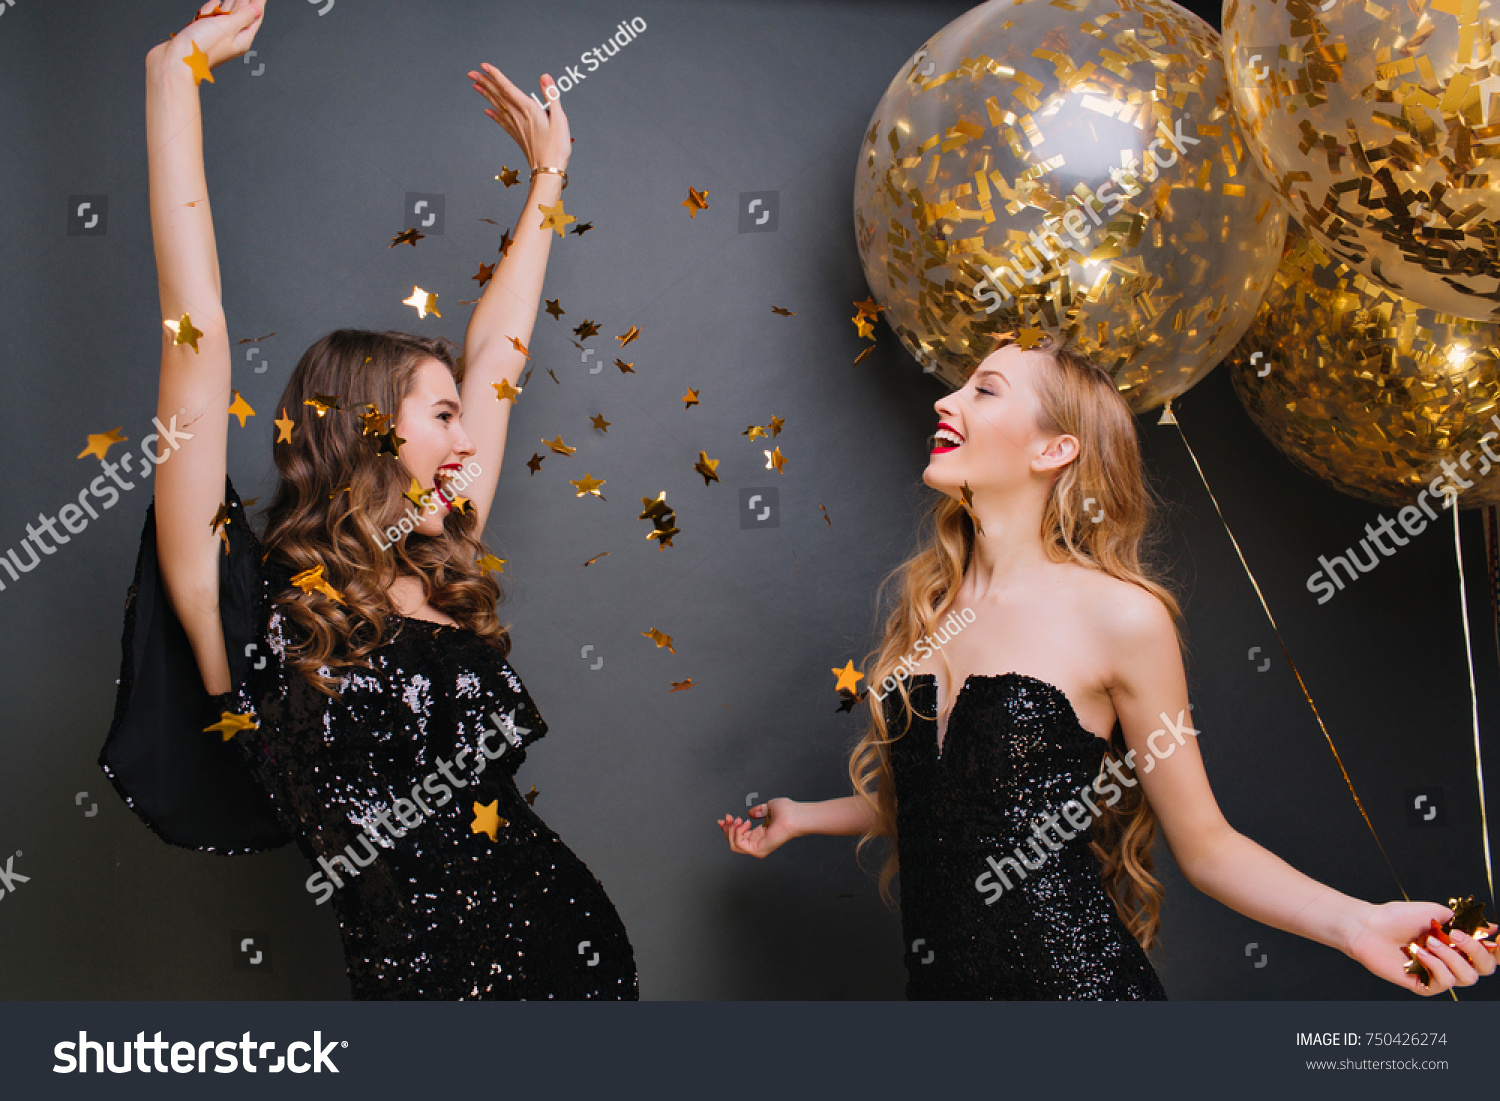 Inspired curly pale woman singing with hands up on dark background. Romantic blonde girl in black outfit holding party balloons and looking at friend which dancing under confetti. #750426274